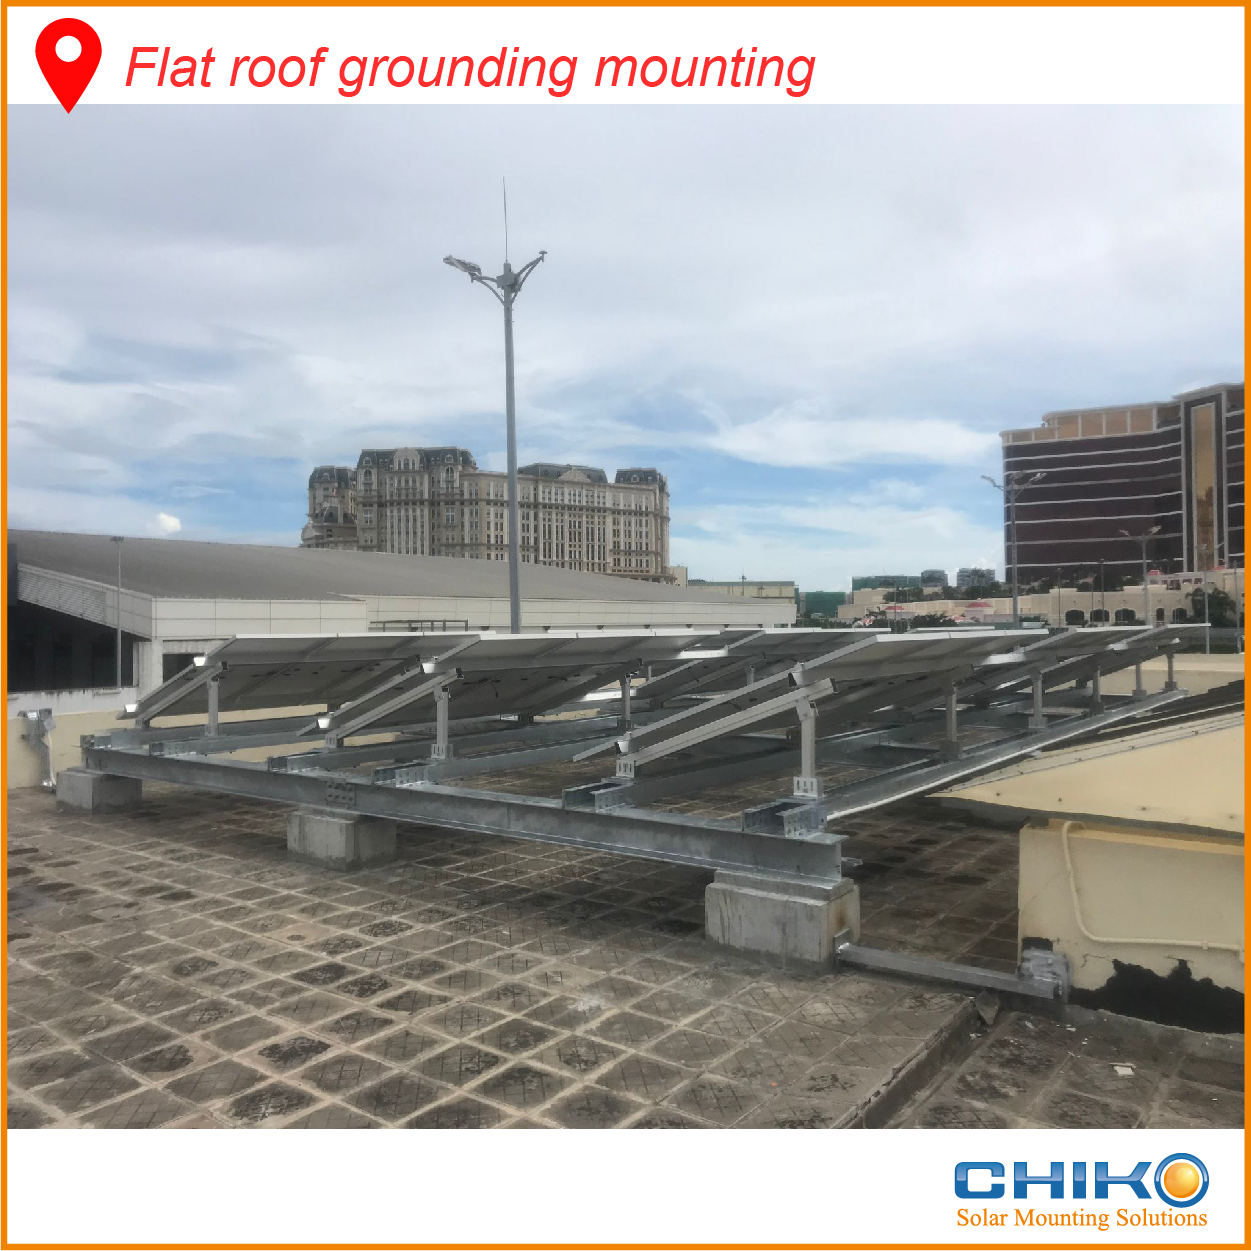 How do commercial flat roofs utilize solar mounting systems?